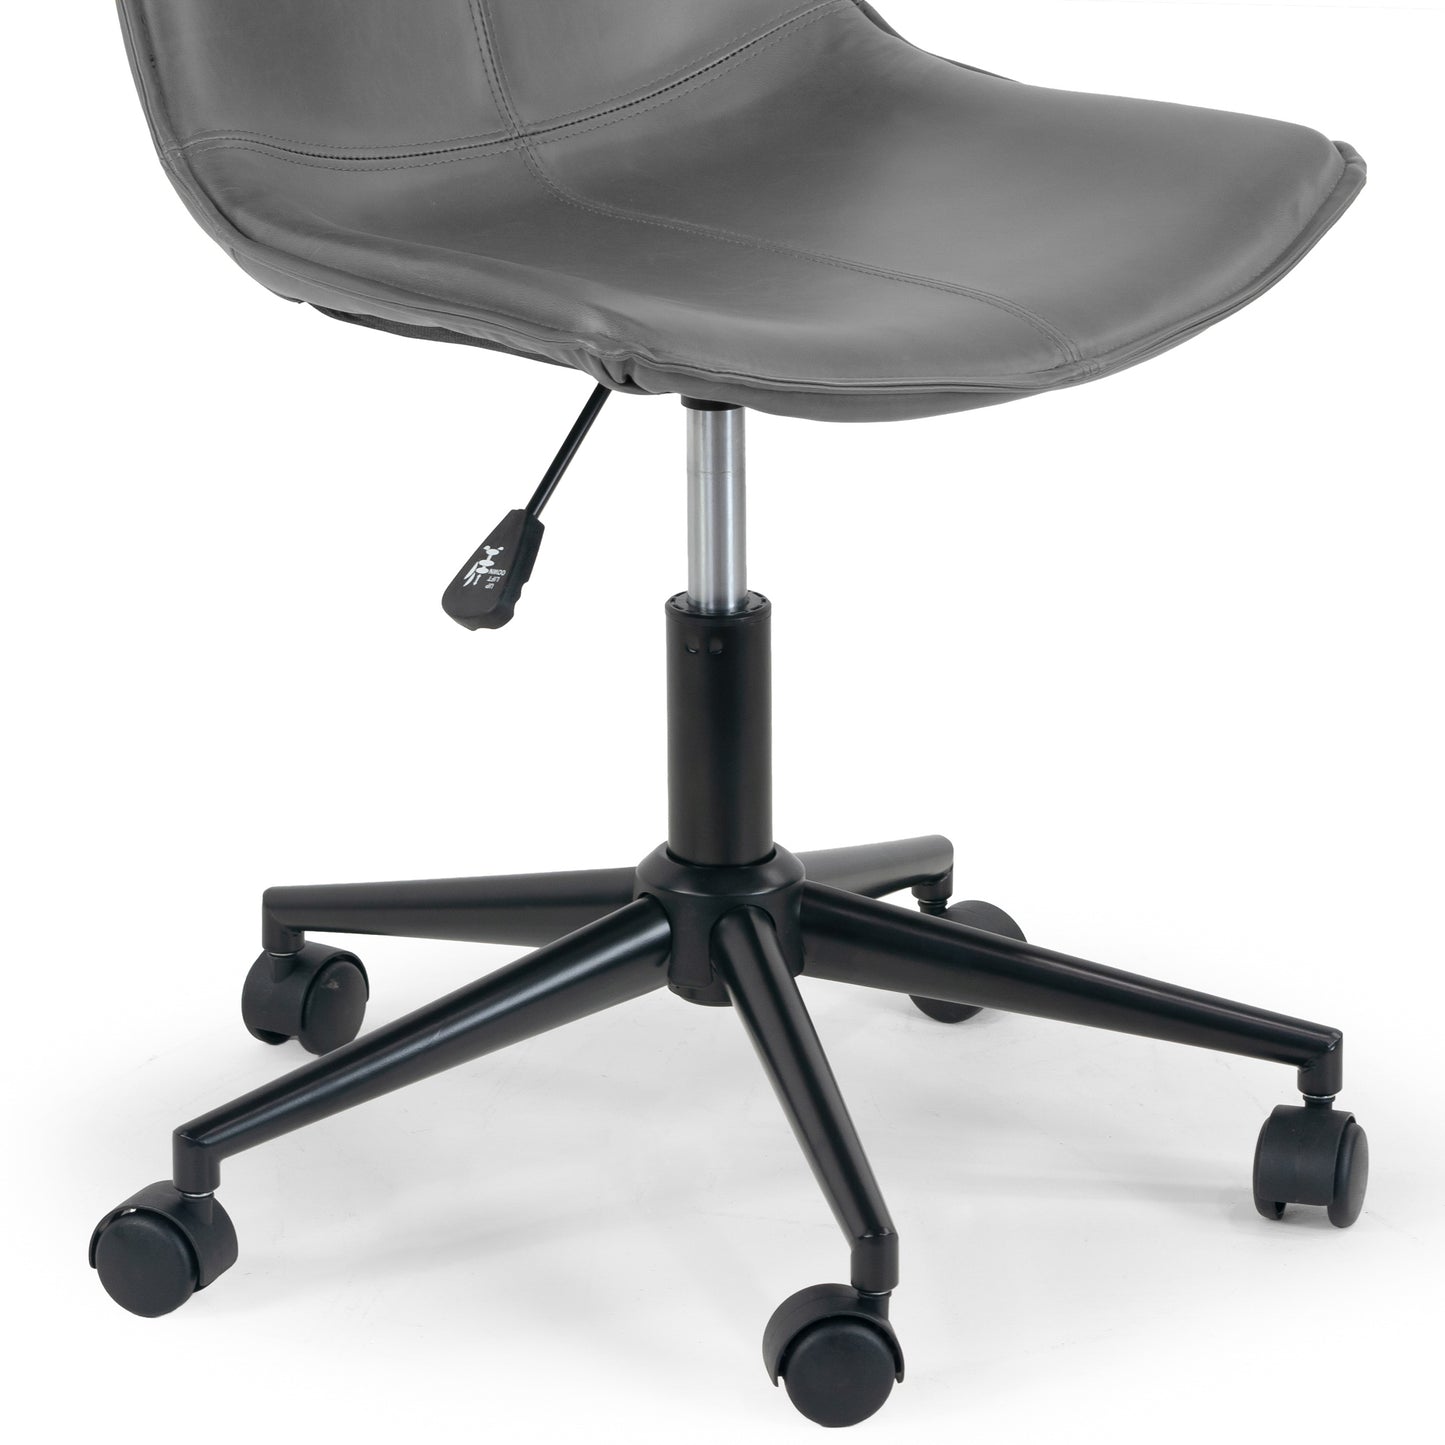 Amery Grey Faux Leather Adjustable Height Swivel Office Chair with Wheel Base